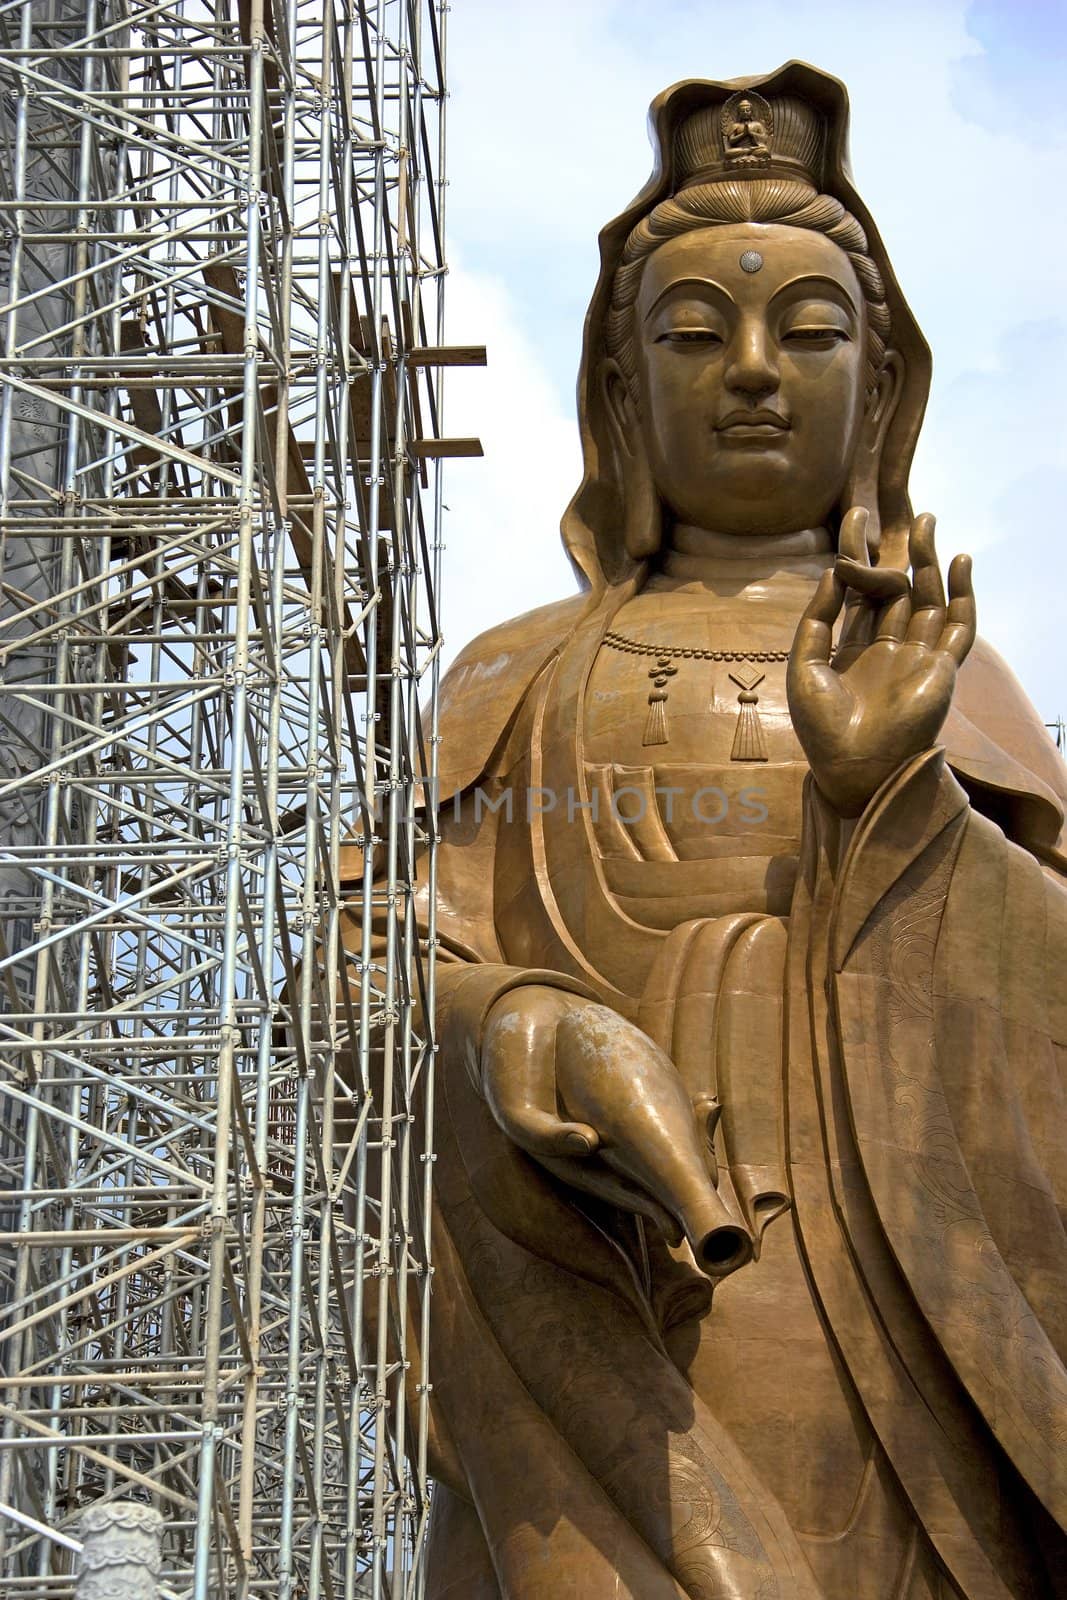 Image of a massive Chinese Goddess of Mercy Statue under construction in Malaysia.